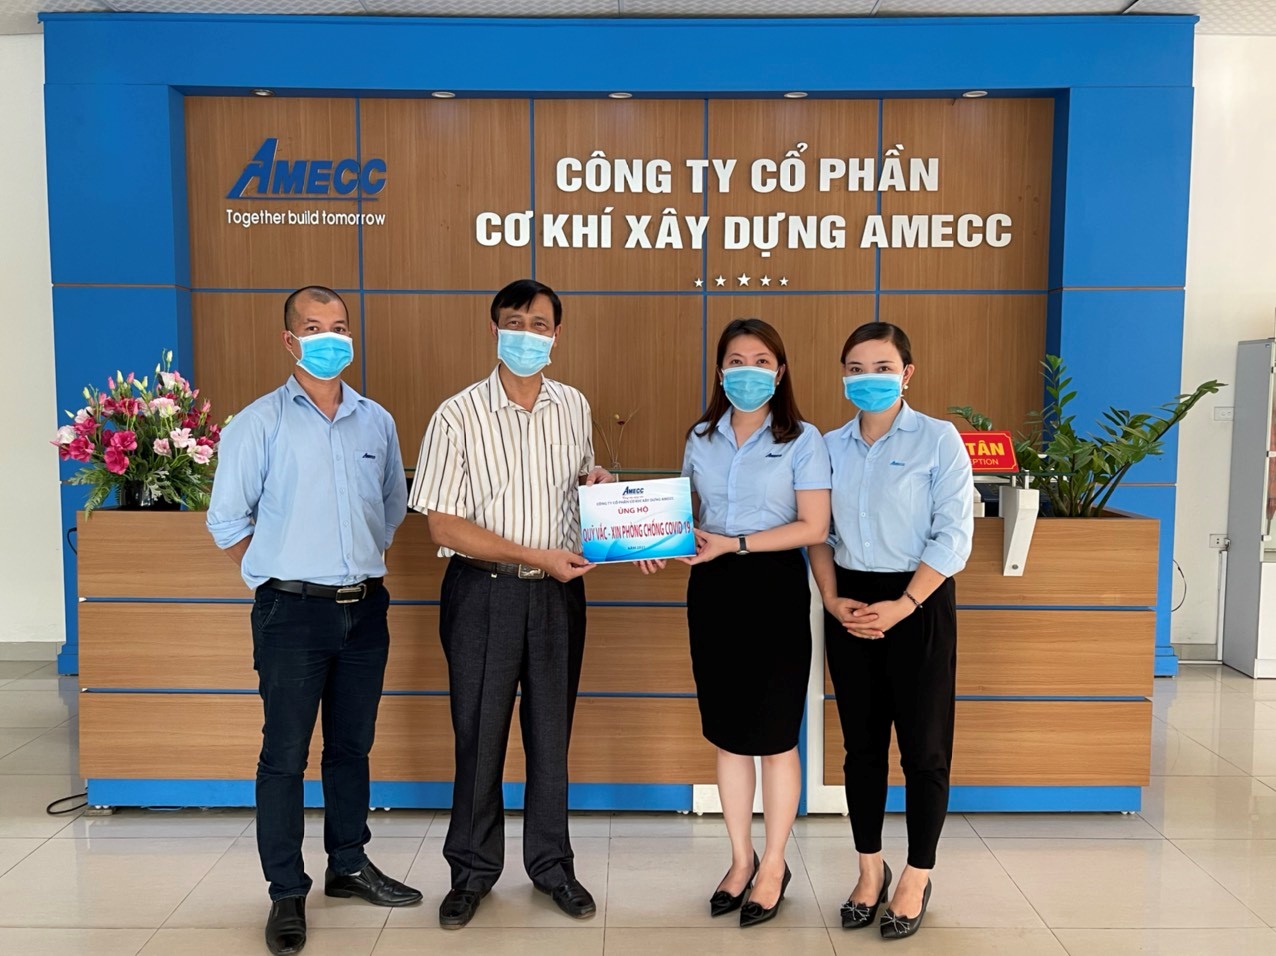 AMECC MECHANICAL CONSTRUCTION JSC CONTRIBUTES TO THE COVID-19 VACCINE FUND.